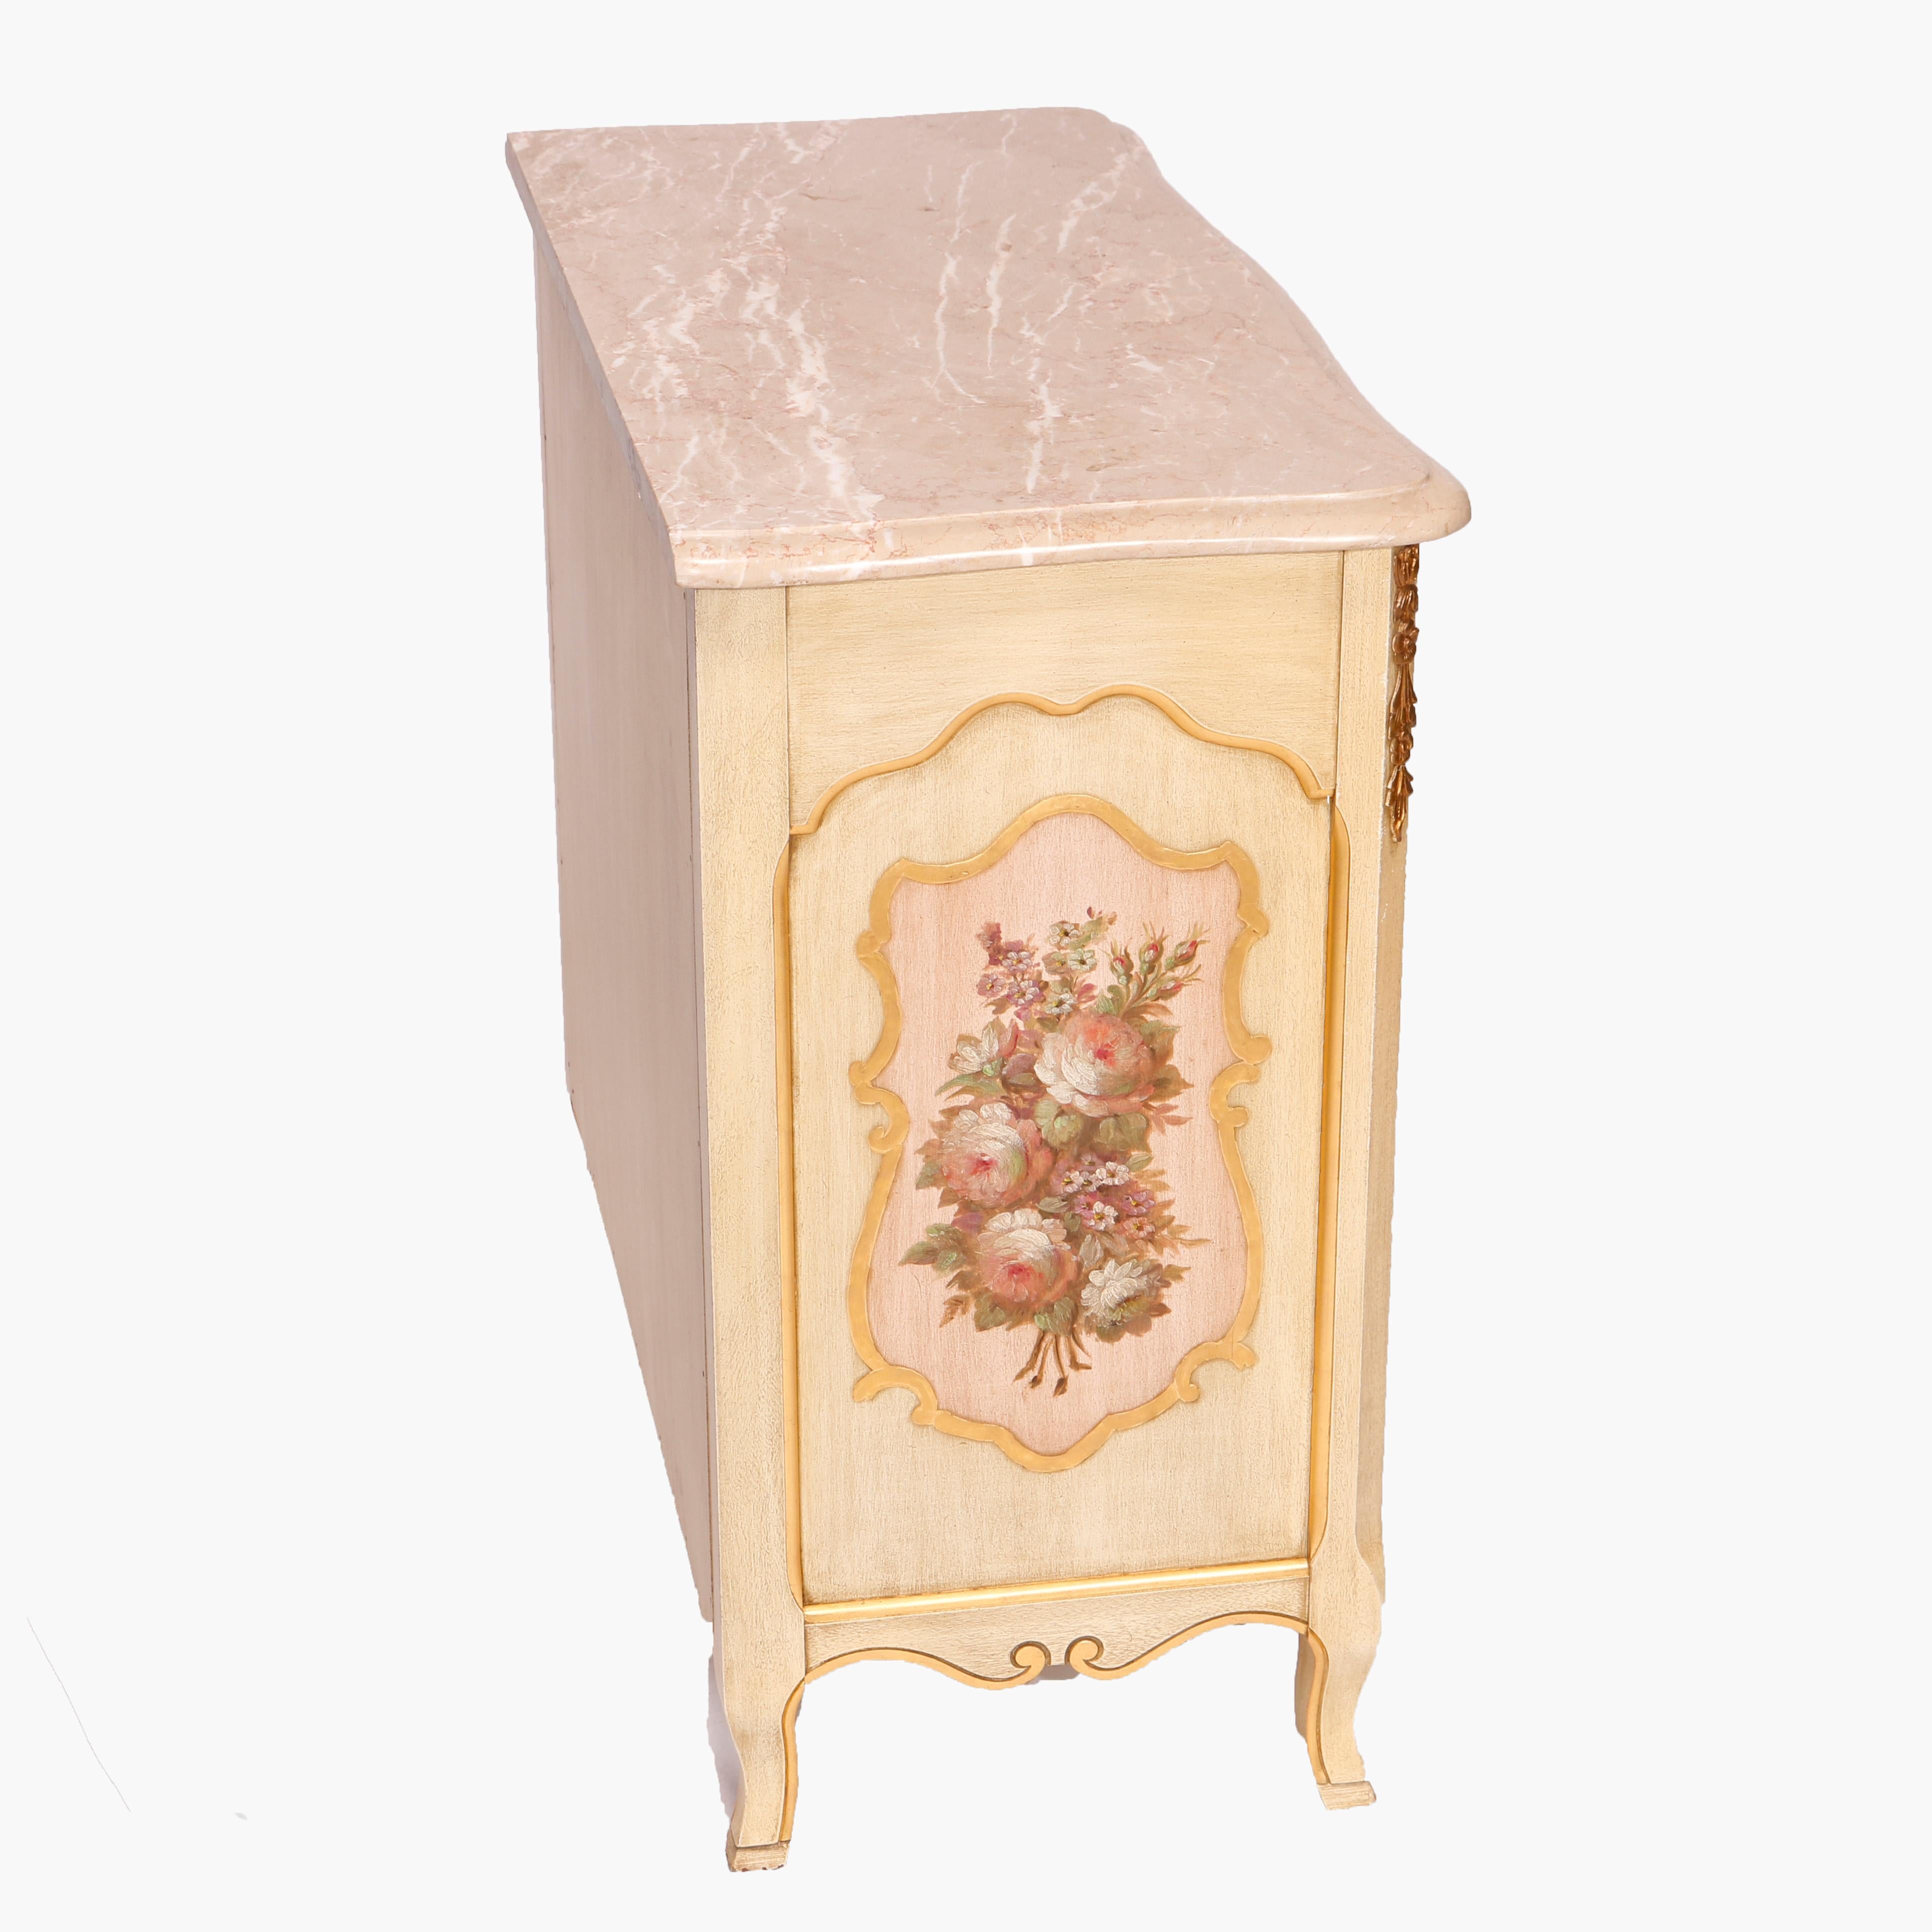 French Provincial Style Polychrome, Gilt &Marble Commode by Kozak Studios 20th C For Sale 9